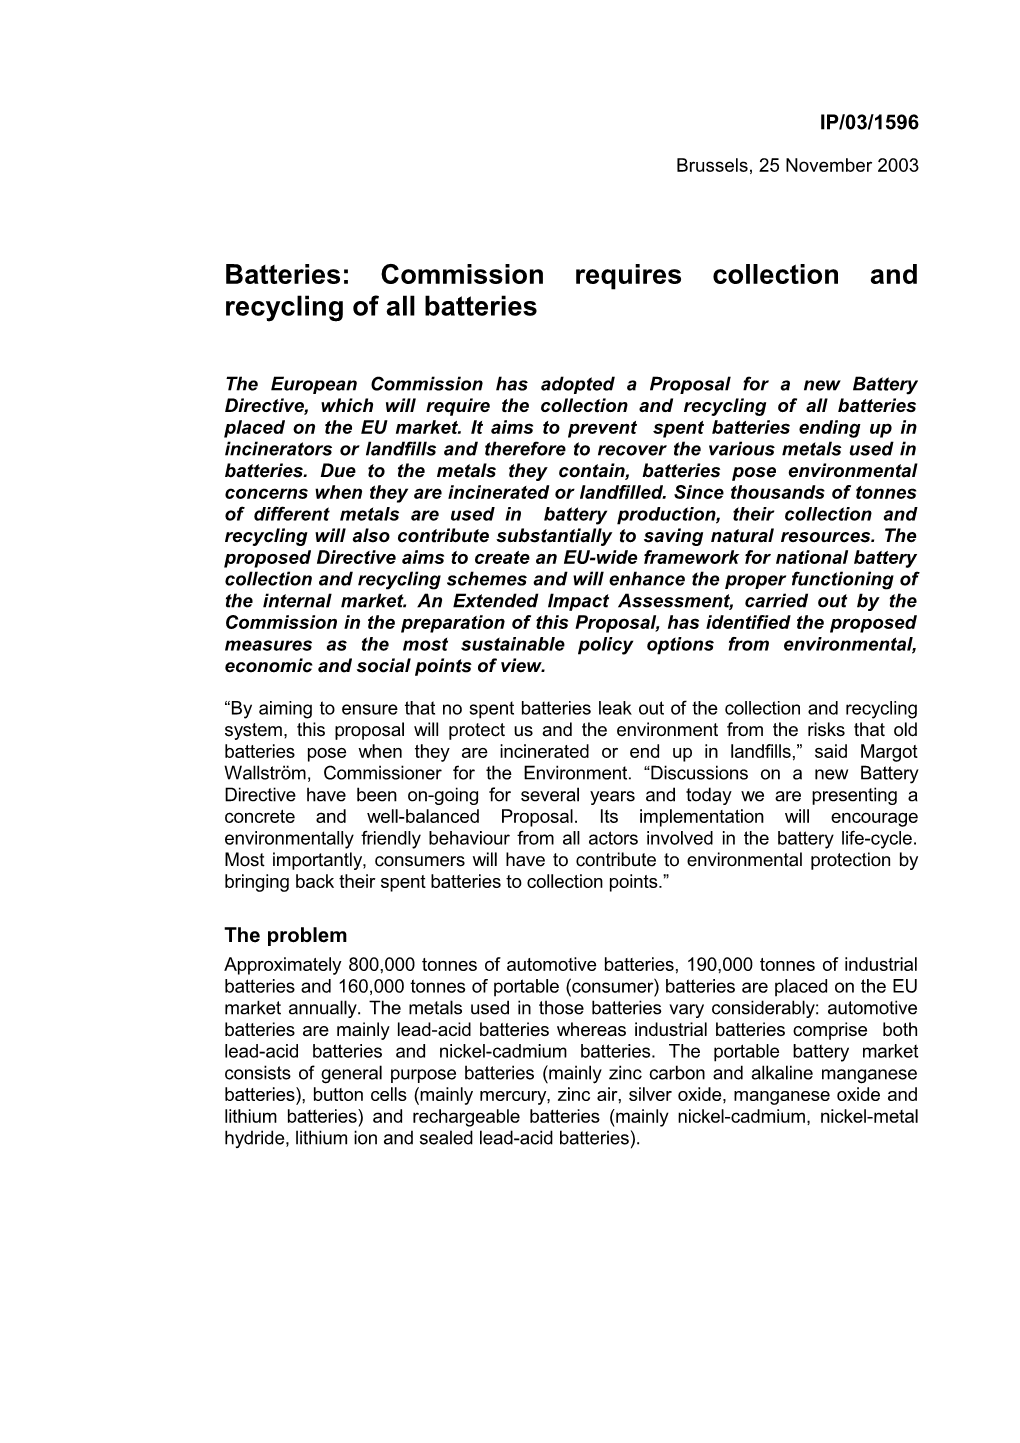 Batteries: Commission Requires Collection and Recycling of All Batteries